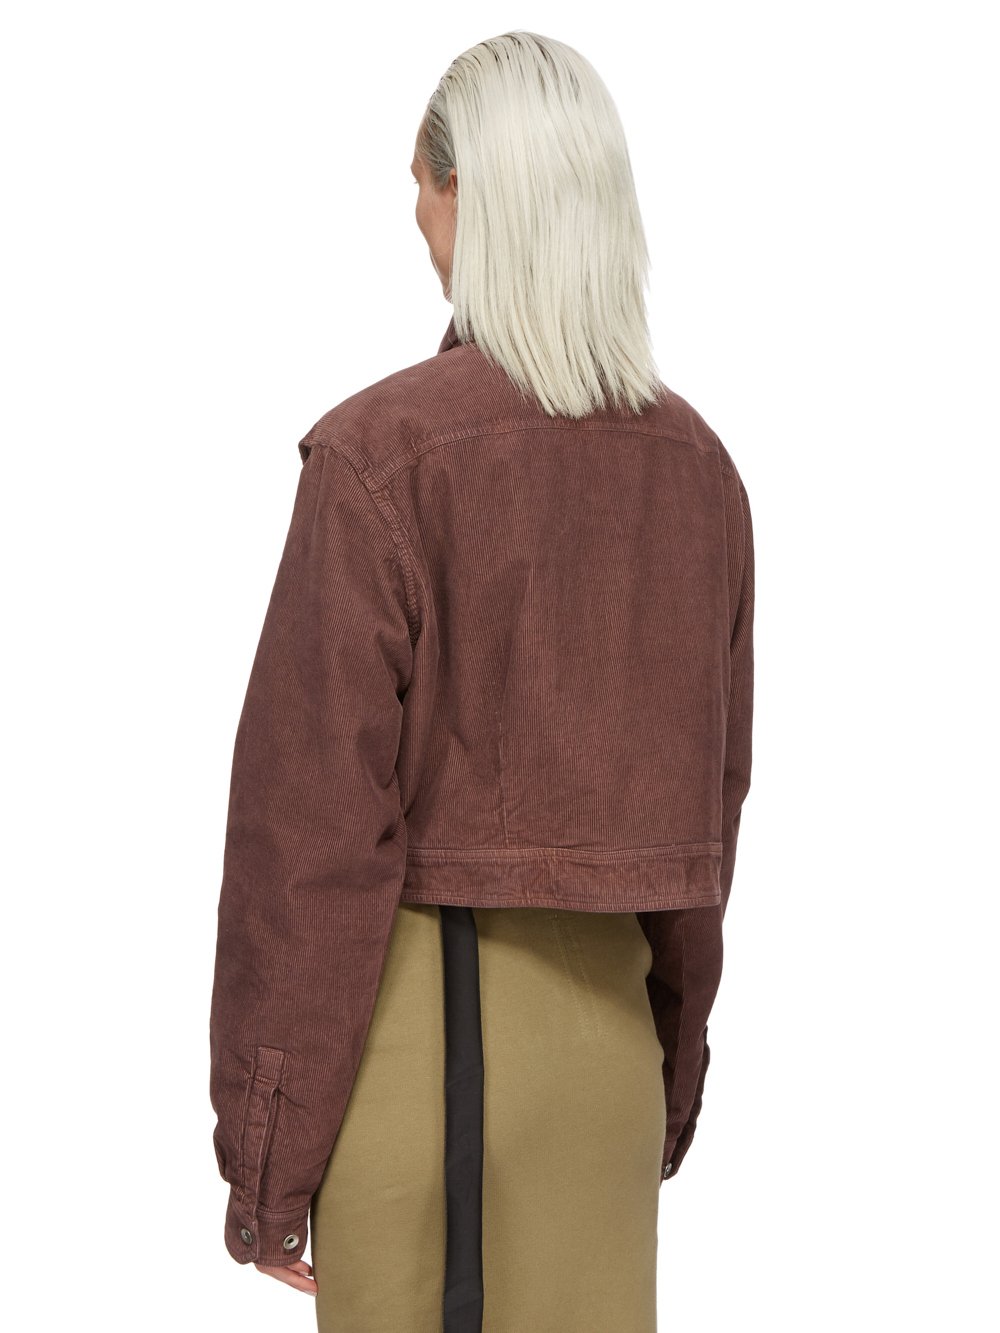 DRKSHDW FW23 LUXOR CAPE SLEEVE CROPPED OUTERSHIRT IN MAUVE COTTON CORDUROY